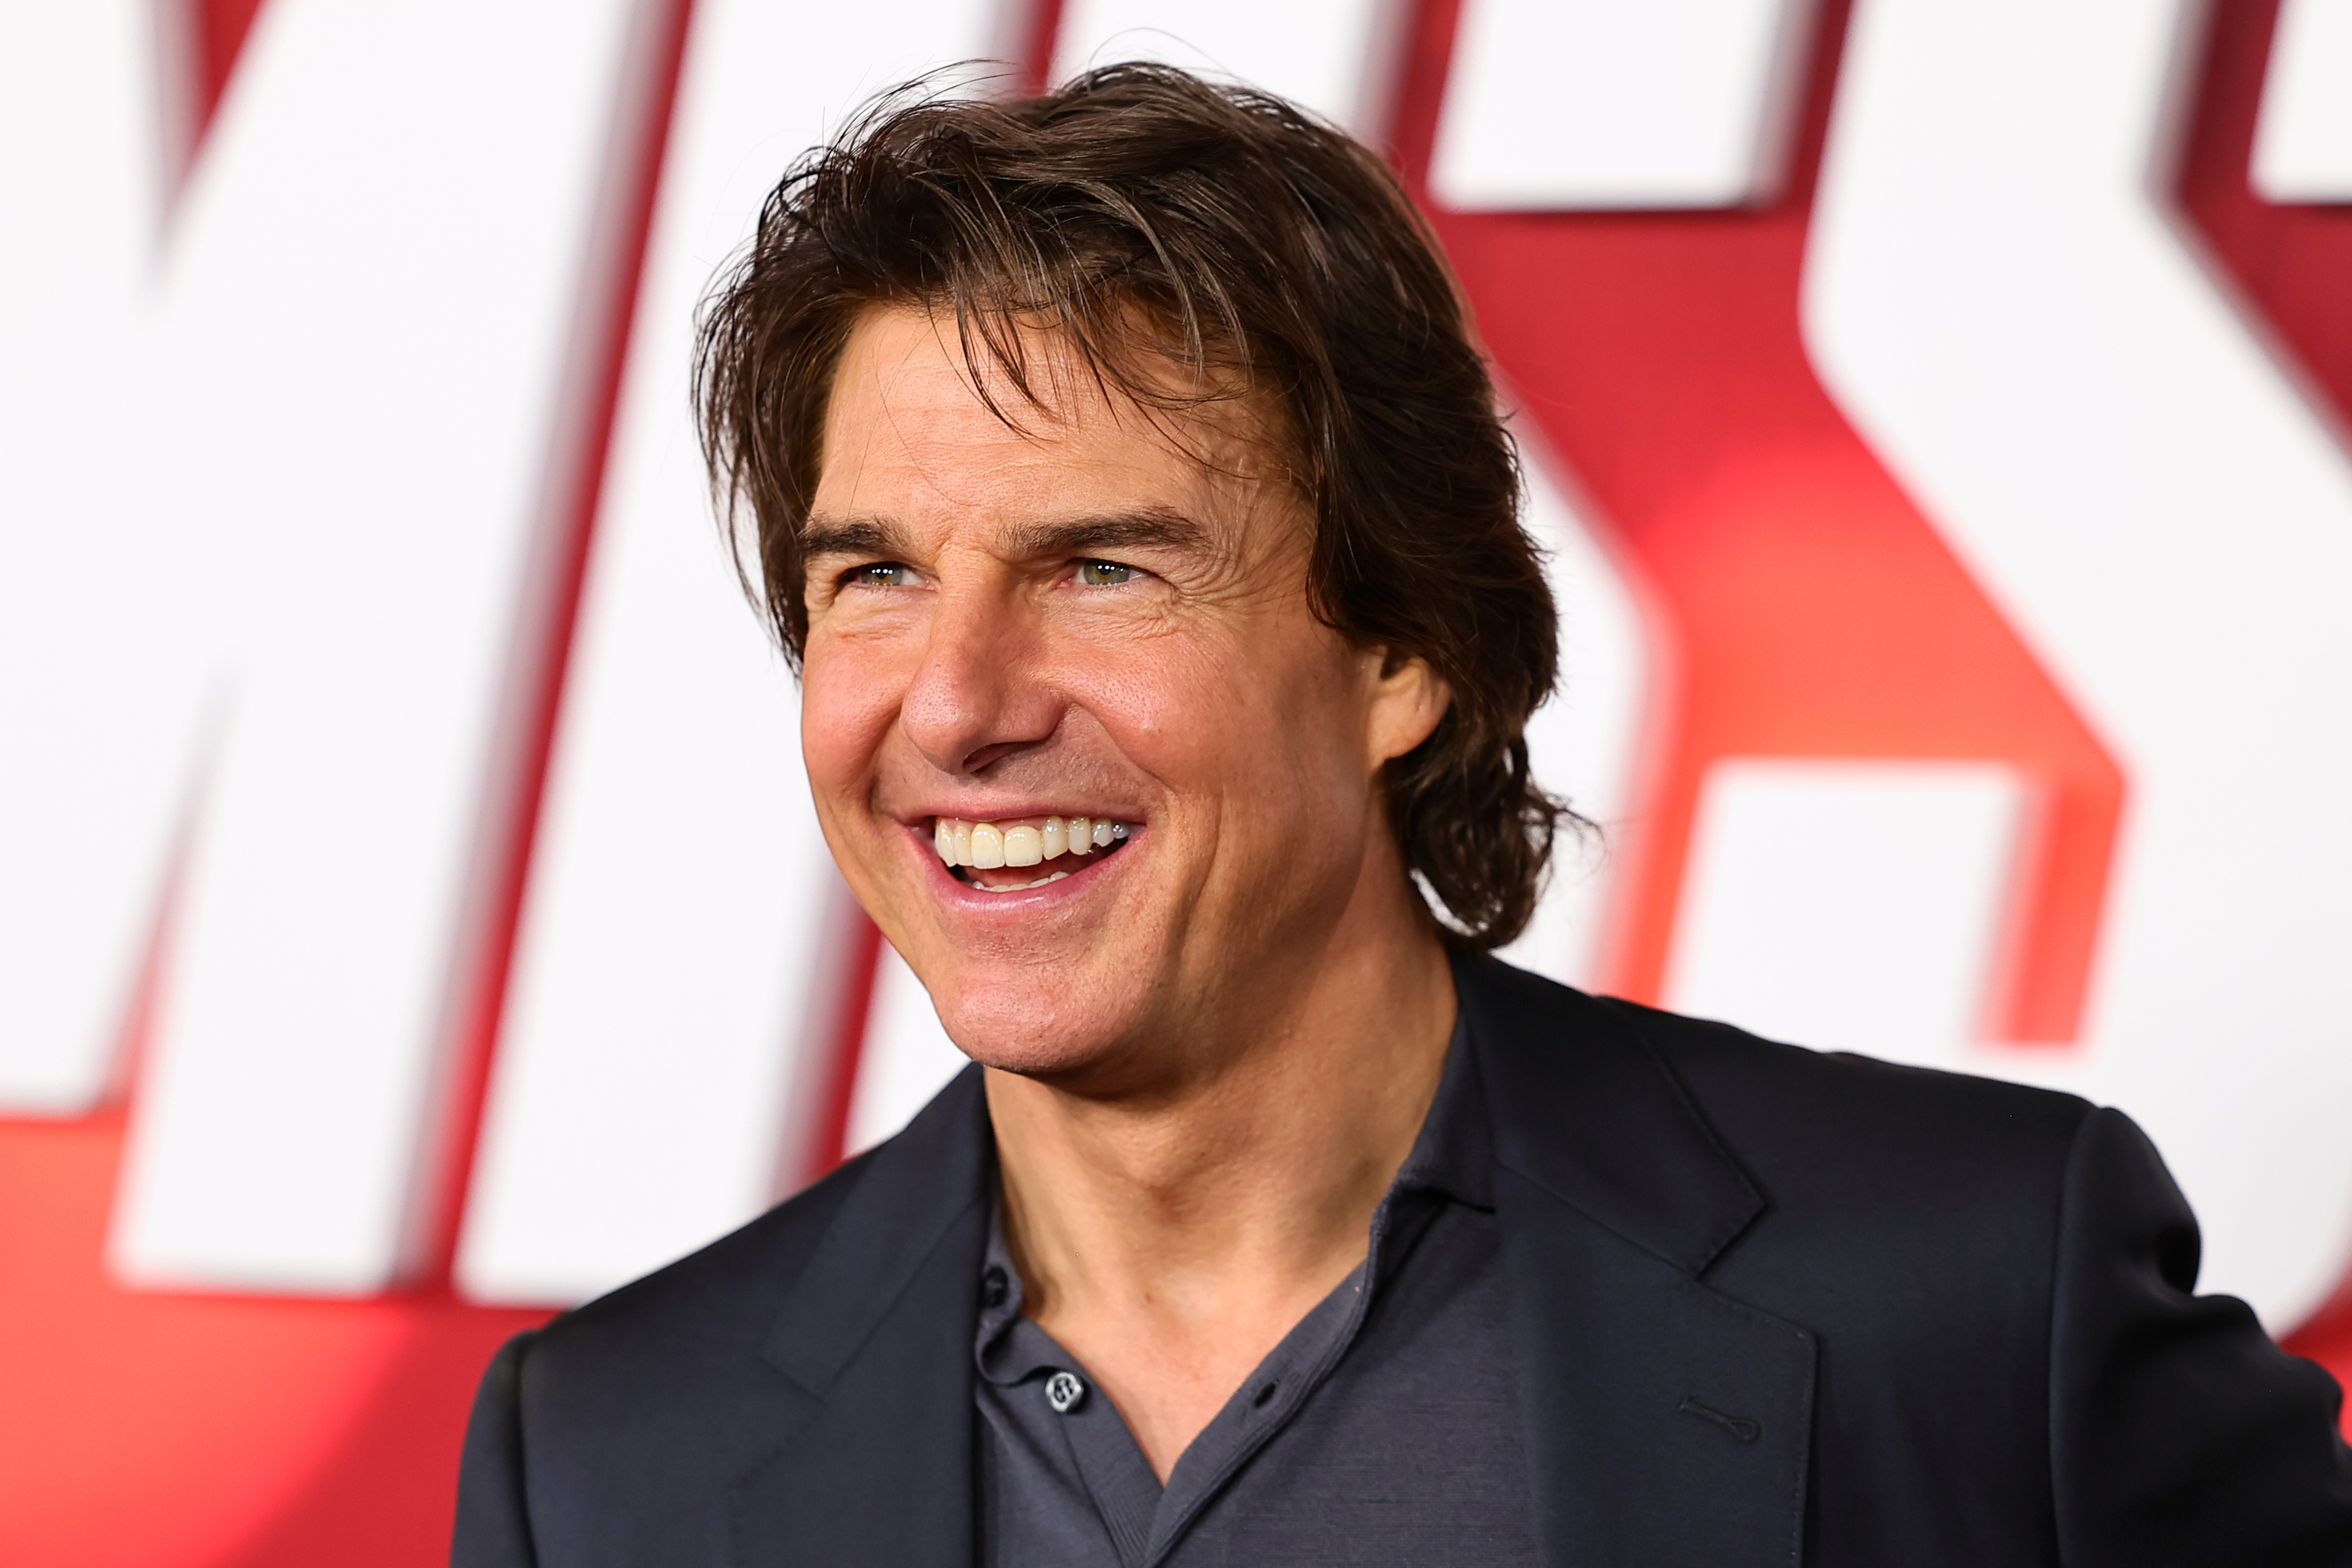 Close-up of Tom Cruise smiling at a media event